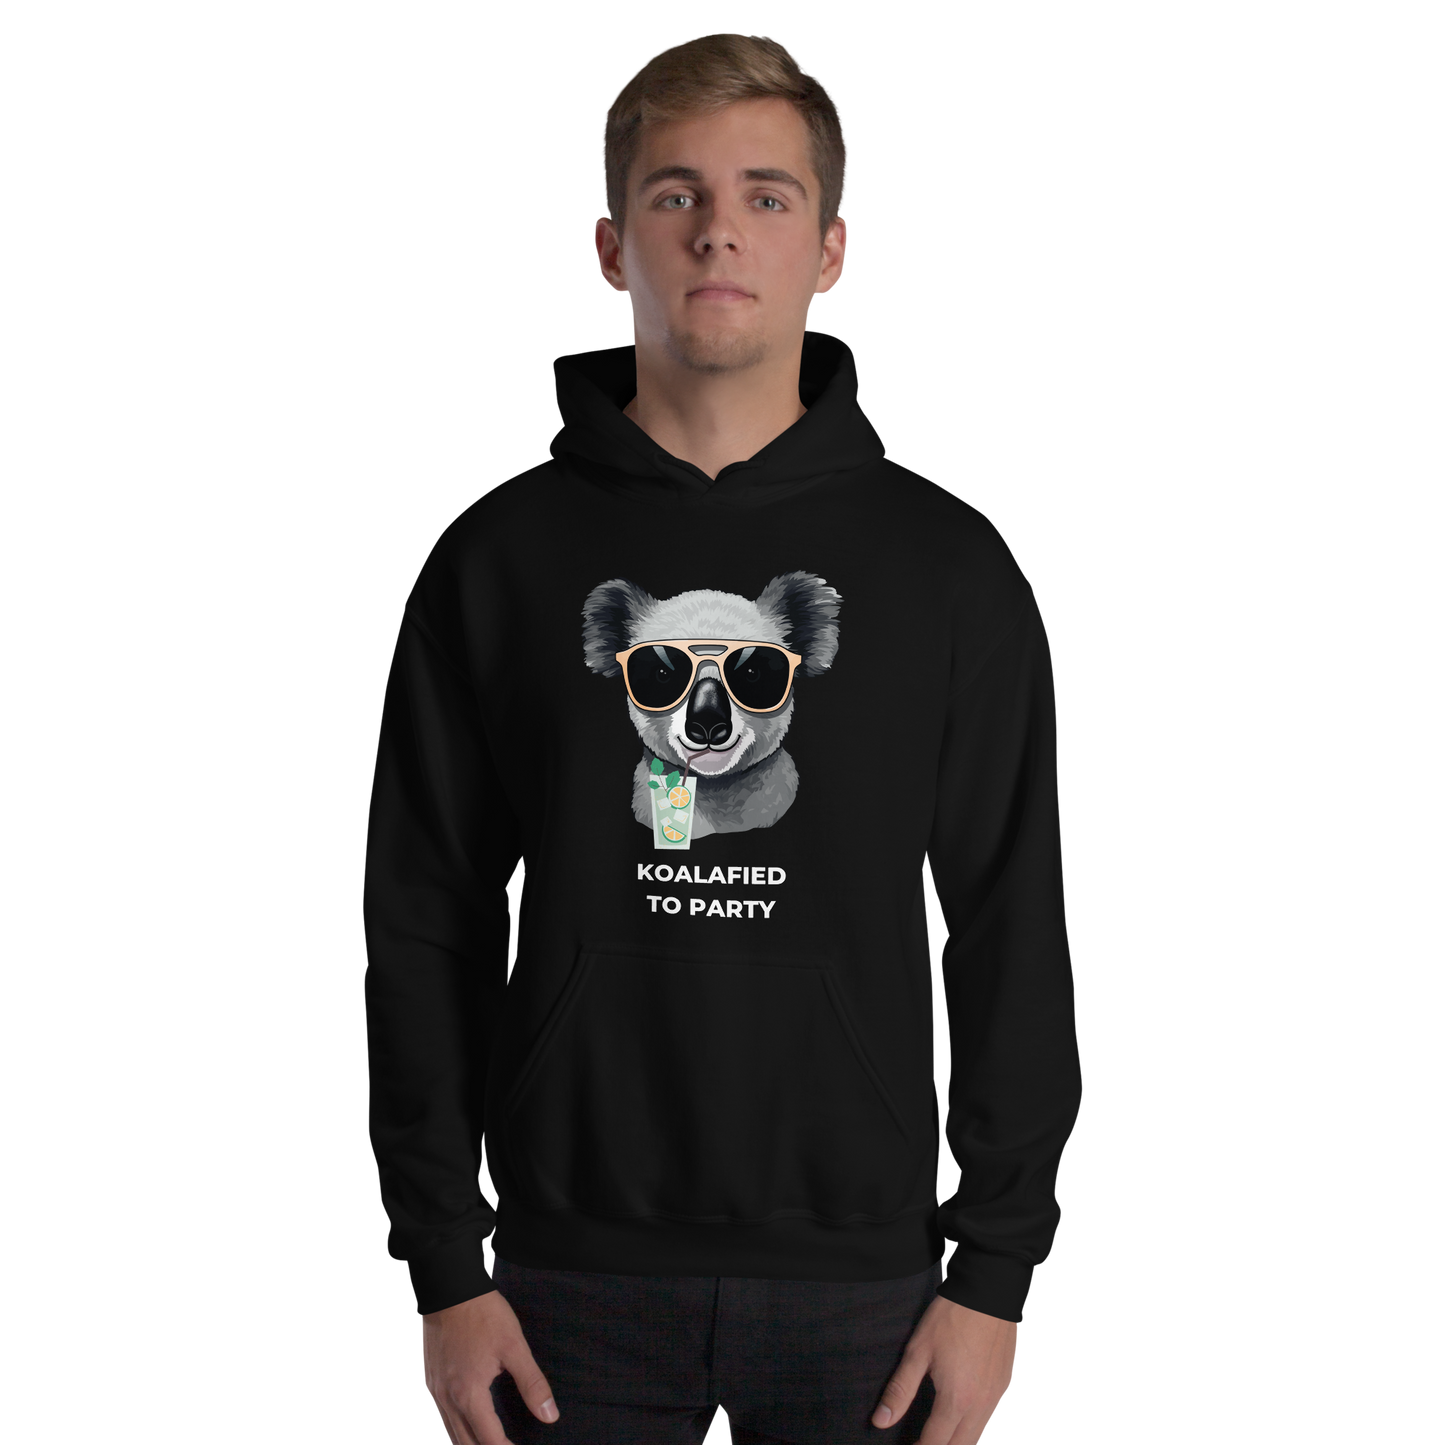 Man wearing a Black Koala Hoodie featuring a captivating Koalafied To Party graphic on the chest - Funny Graphic Koala Hoodies - Boozy Fox